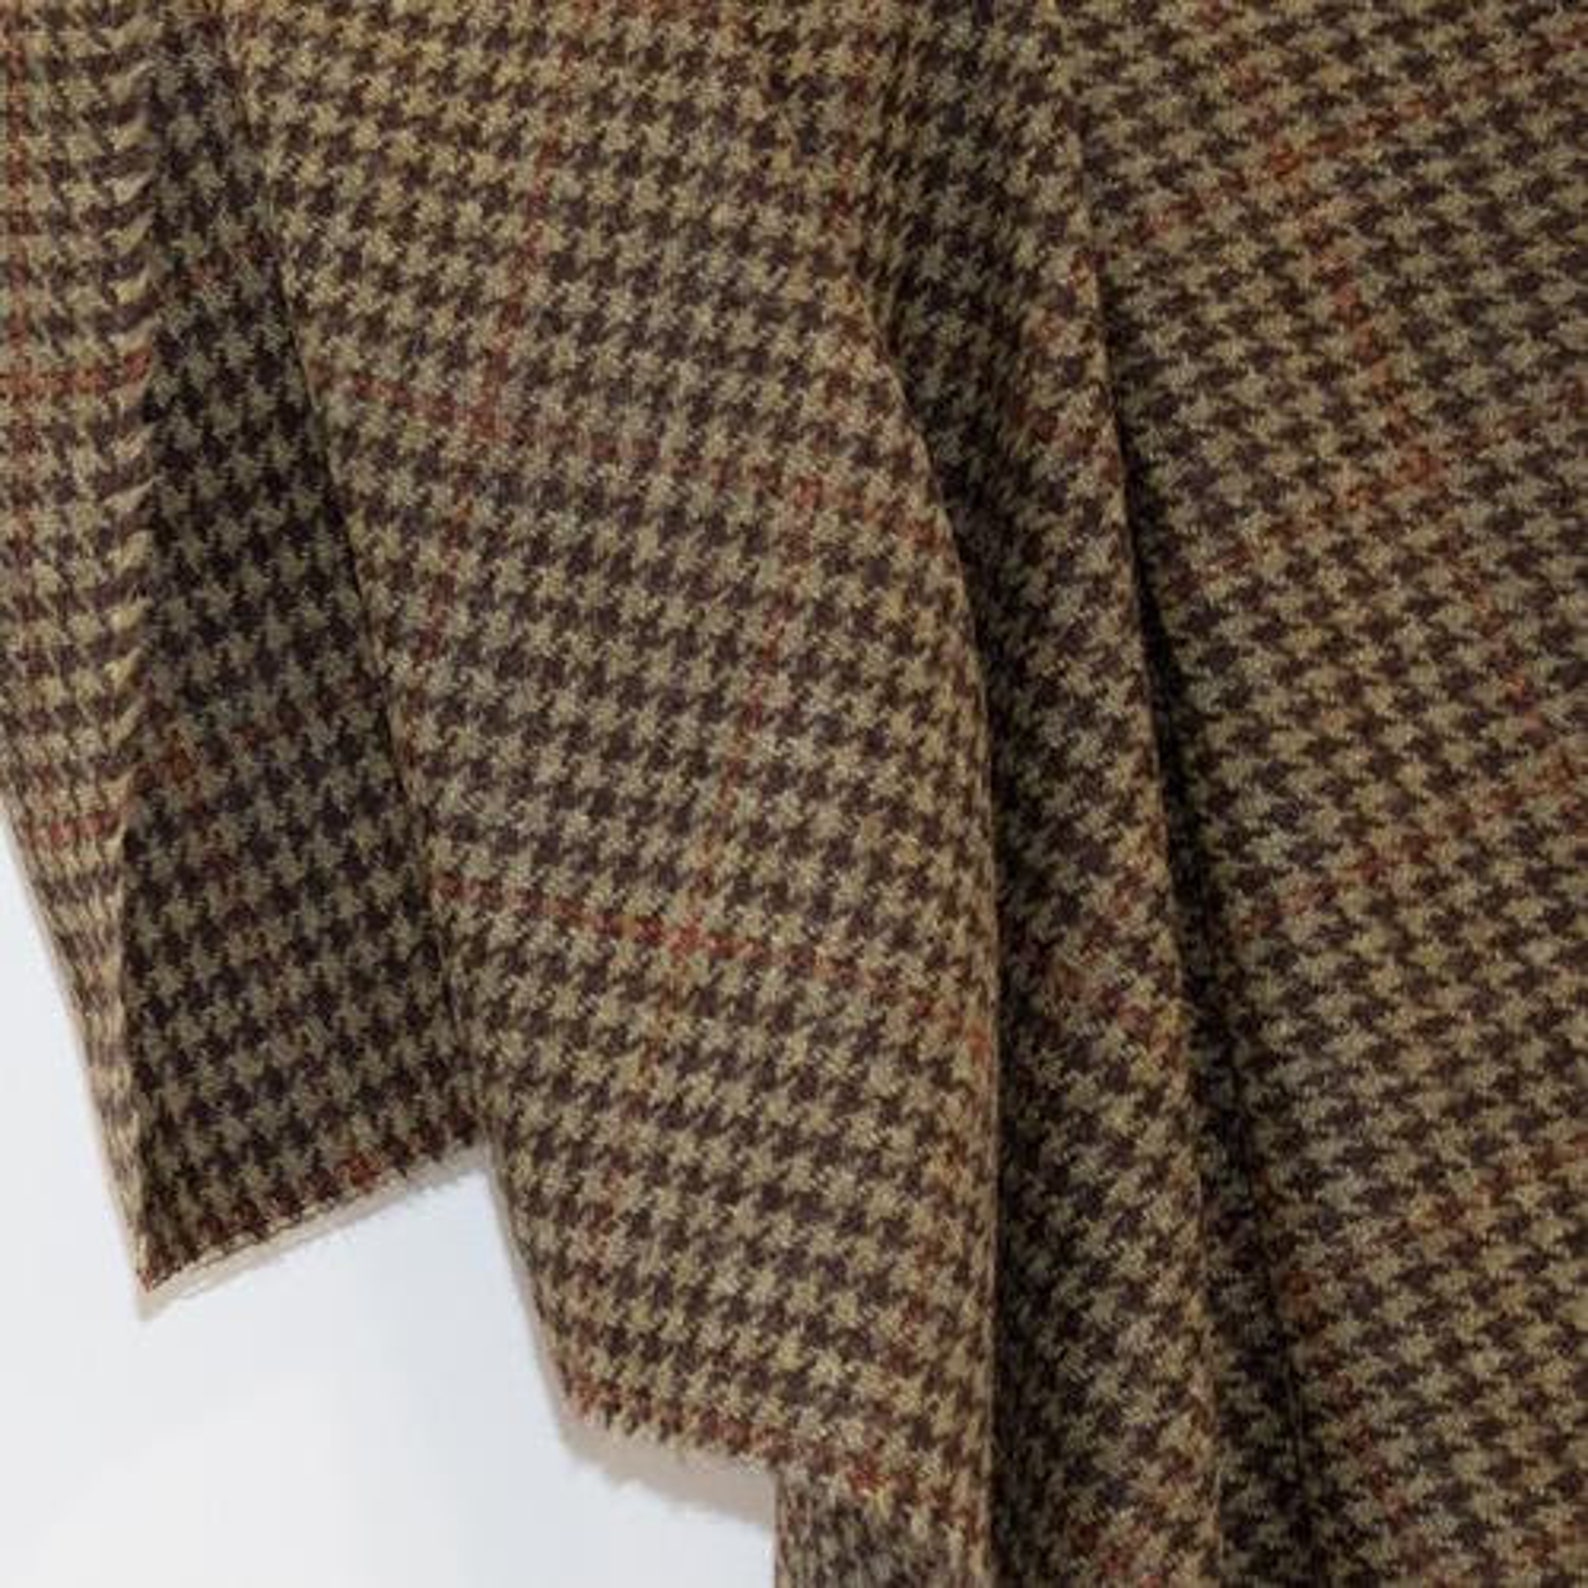 Olive Green Houndstooth Donegal Tweed Fabric Sample | Etsy